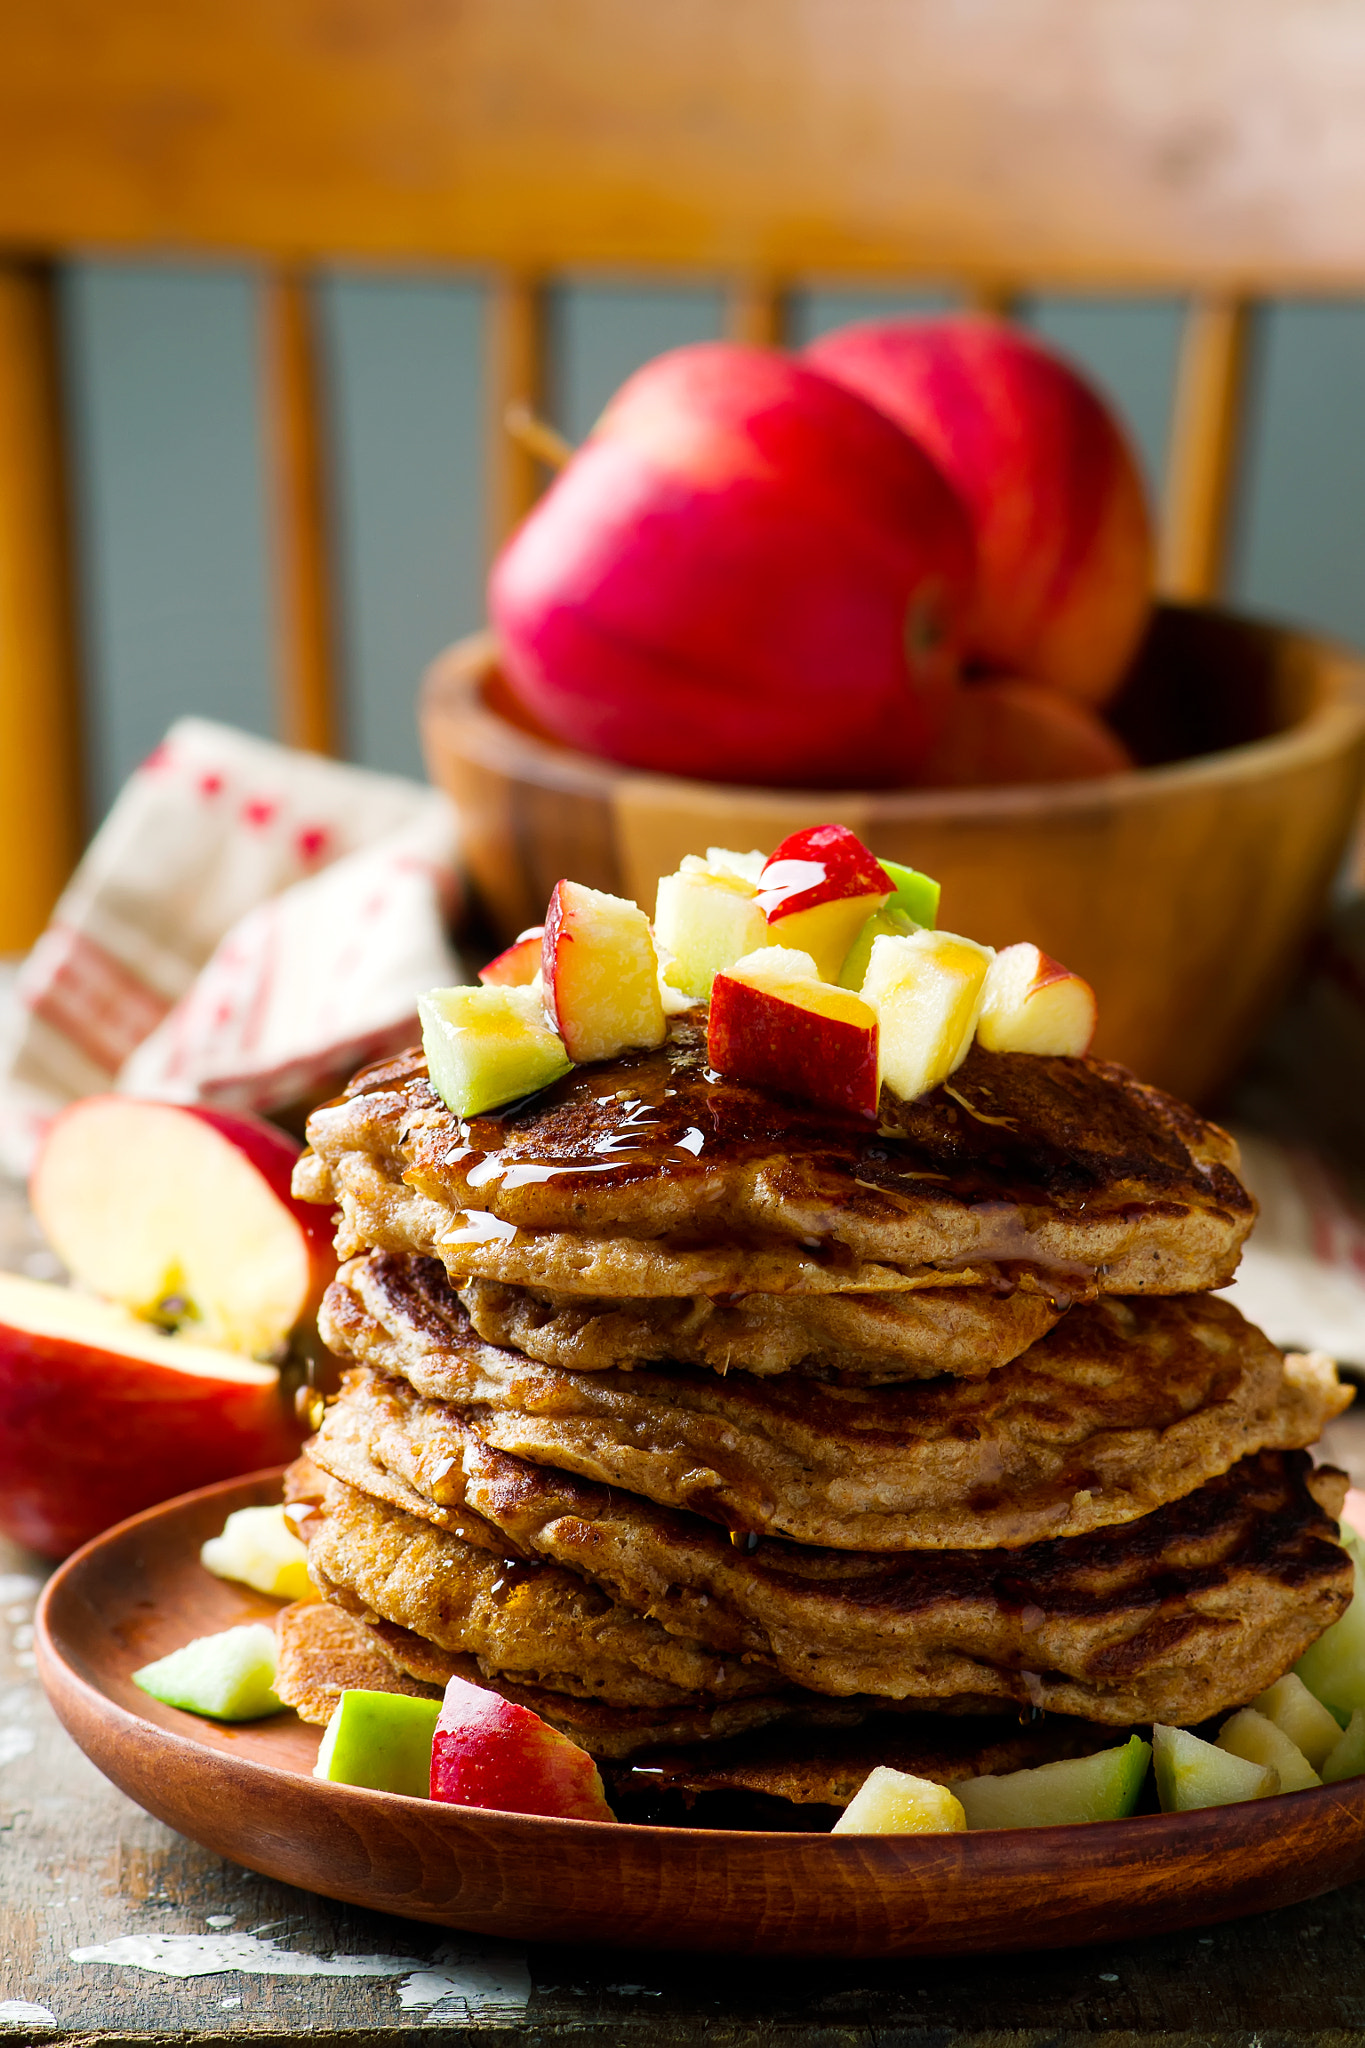 Nikon D3100 + Nikon AF-S Micro-Nikkor 105mm F2.8G IF-ED VR sample photo. Apples pancakes with marple syrup photography